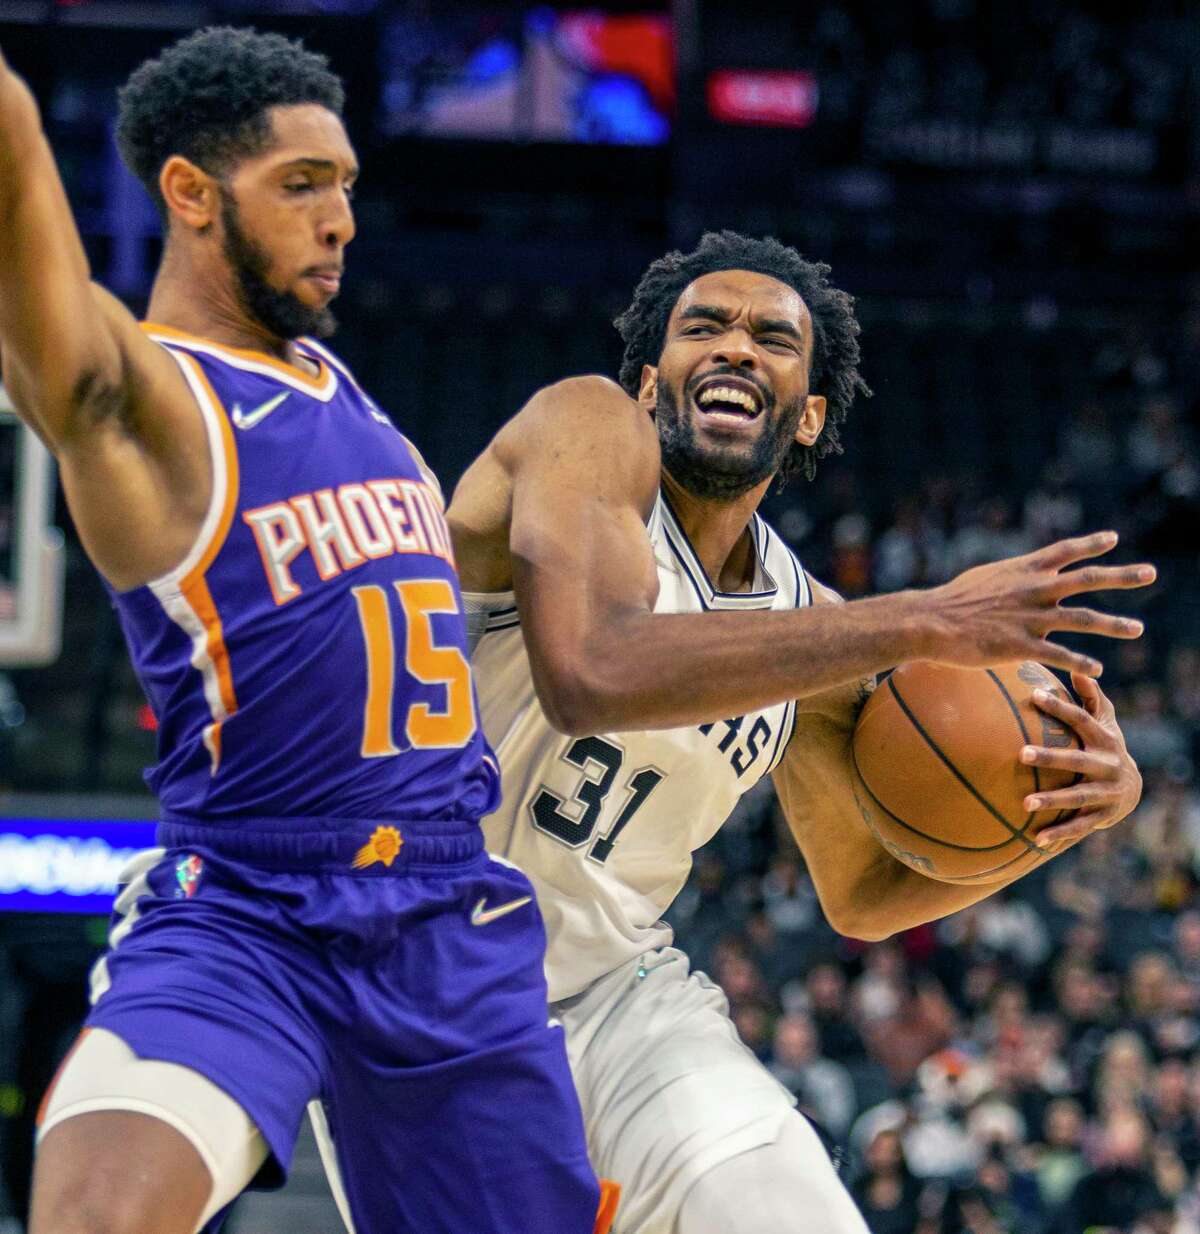 On the point guard spot after the Spurs waived Cam Payne